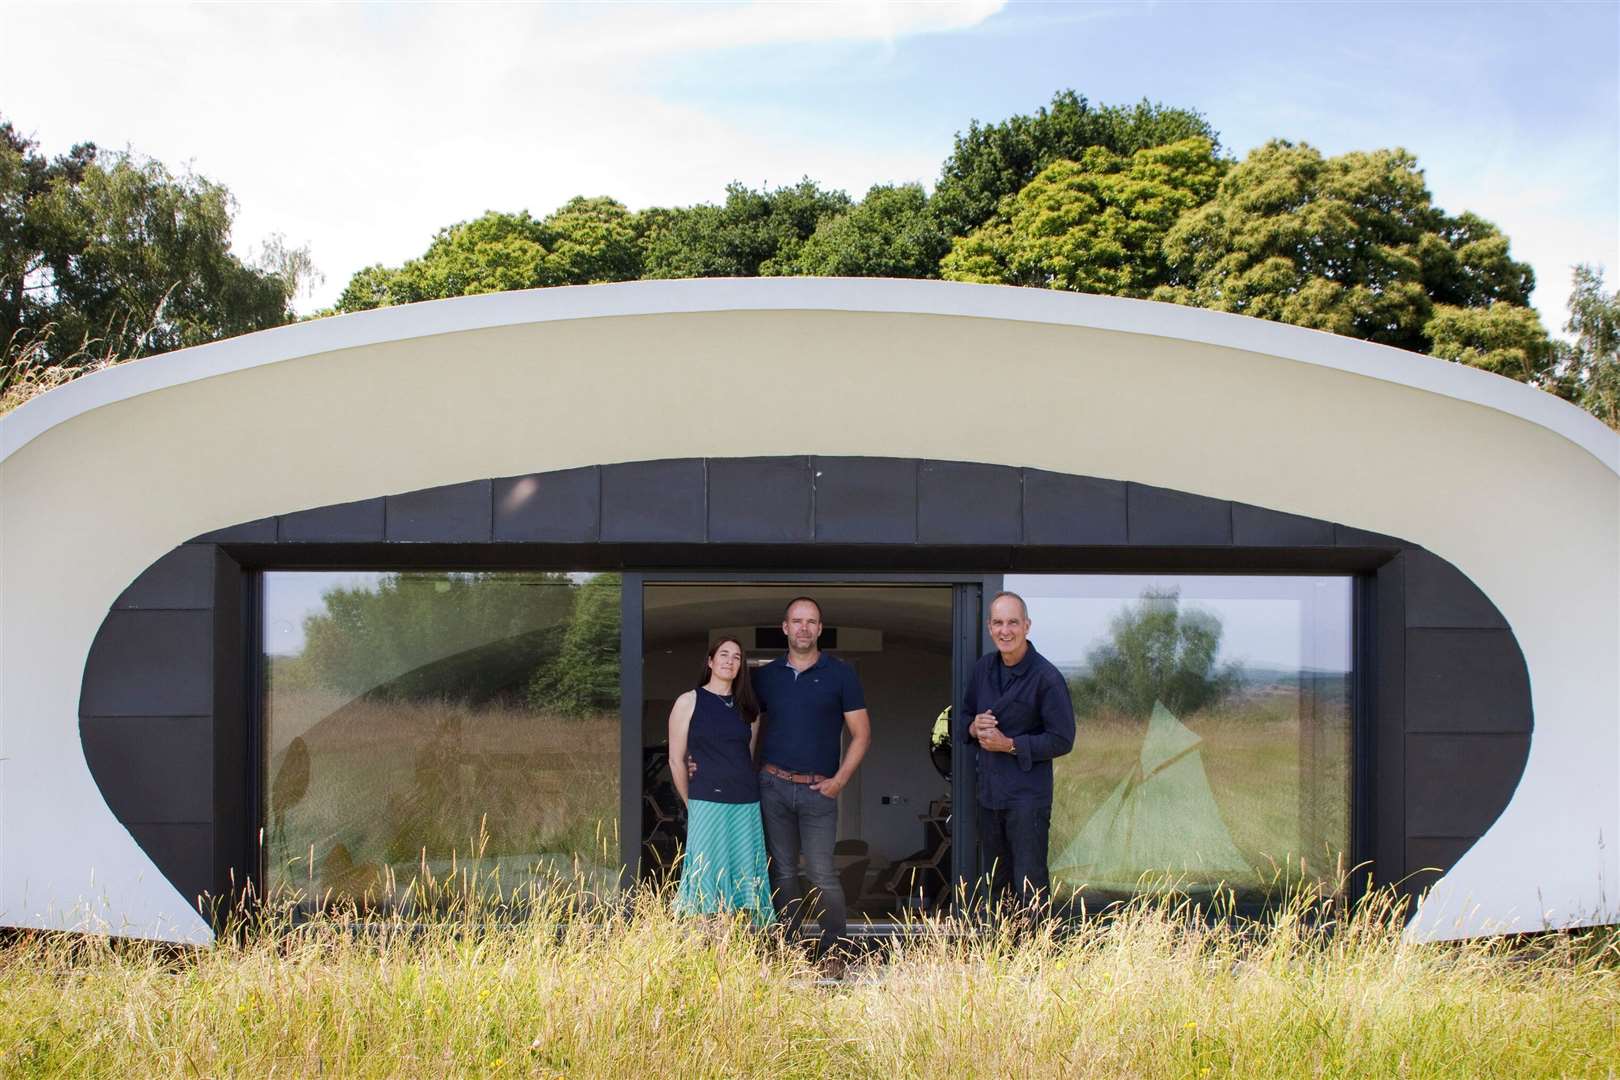 The futuristic house on a hill was built by Canterbury resident Dorran. Picture: Channel 4